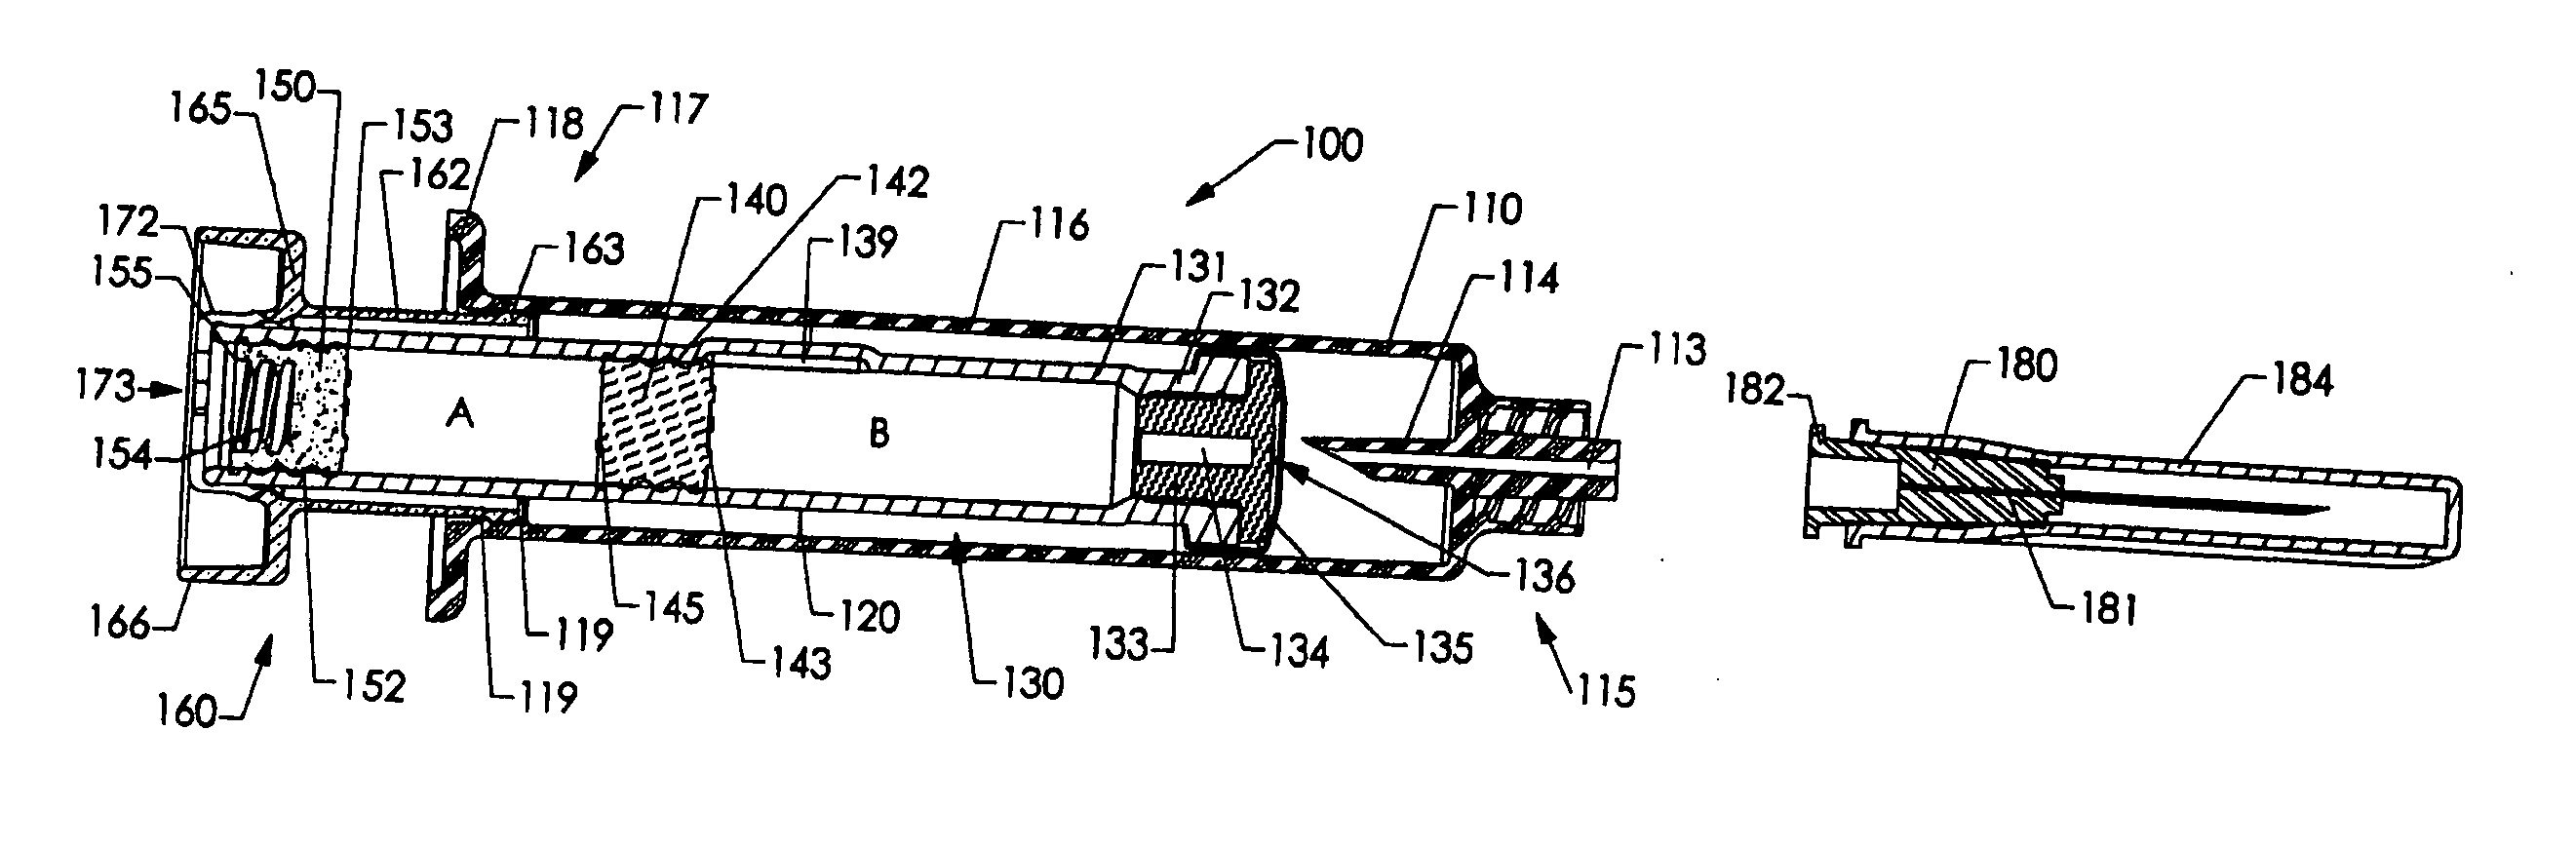 Pharmaceutical cartridge assembly and method of filling same